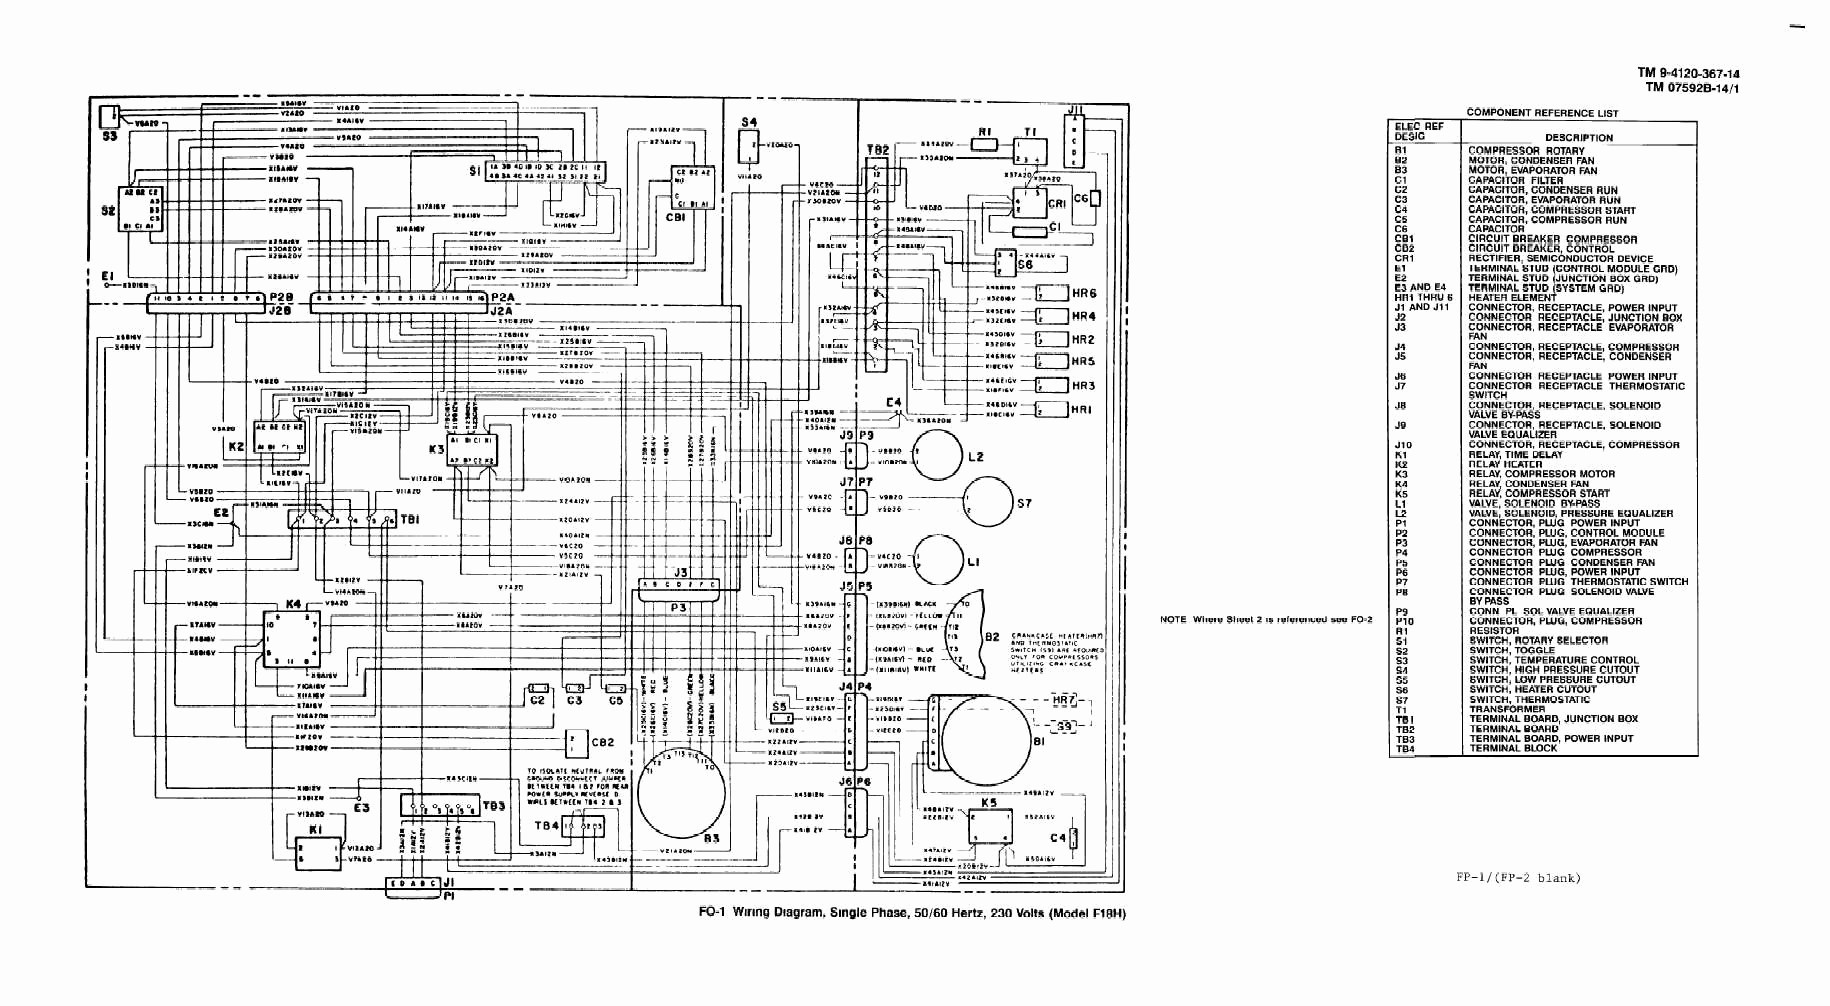 Full Size of Wiring Diagram Contactor Wiring Diagram Elegant Ponent Single Phase Wiring Fo 1